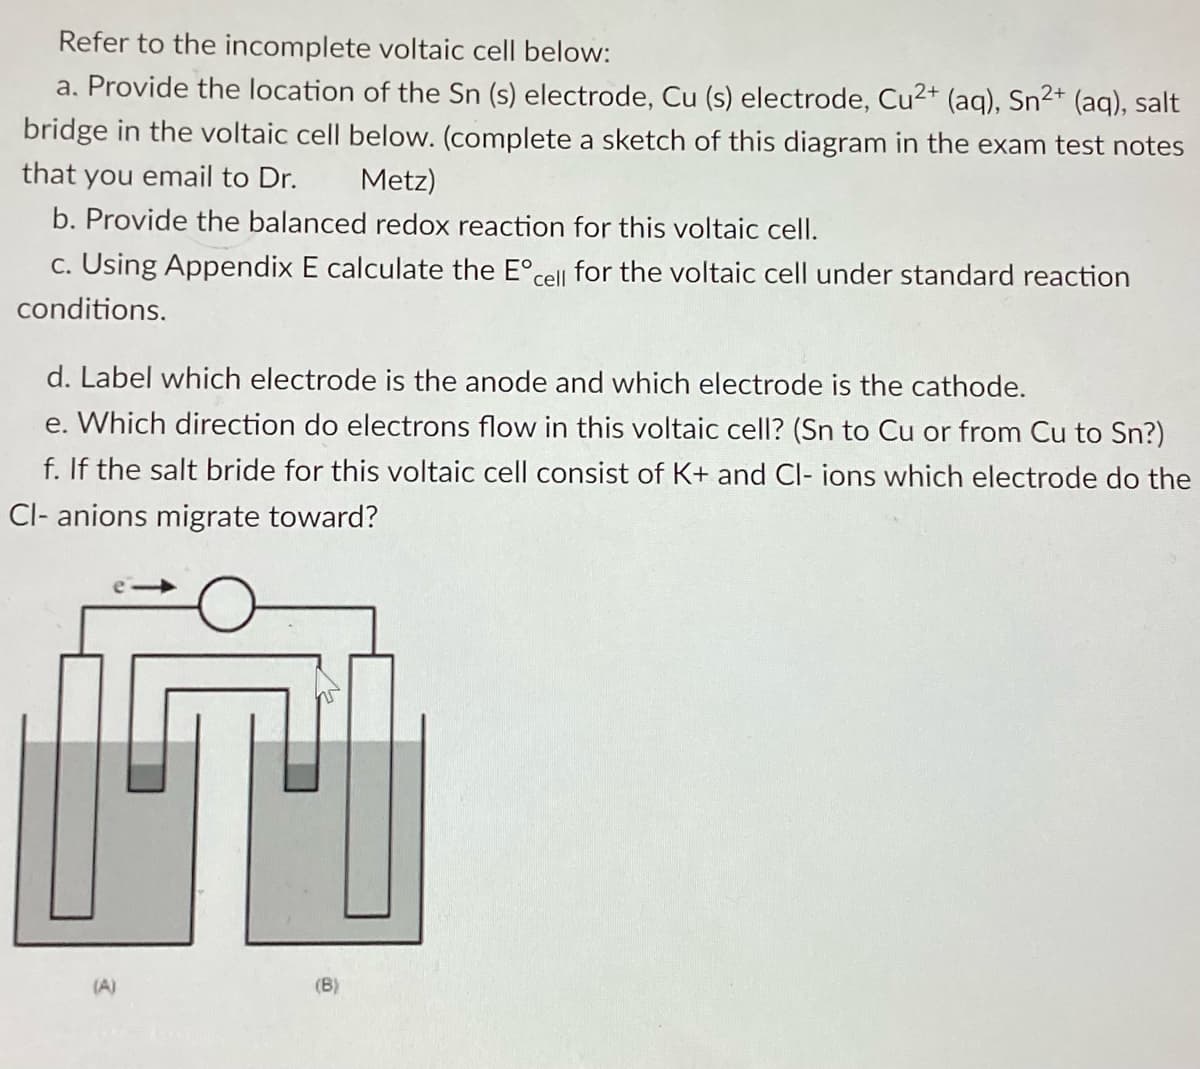 Refer to the incomplete voltaic cell below:
a. Provide the location of the Sn (s) electrode, Cu (s) electrode, Cu2+ (aq), Sn²+ (aq), salt
bridge in the voltaic cell below. (complete a sketch of this diagram in the exam test notes
that you email to Dr.
Metz)
b. Provide the balanced redox reaction for this voltaic cell.
c. Using Appendix E calculate the Eºcell for the voltaic cell under standard reaction
conditions.
d. Label which electrode is the anode and which electrode is the cathode.
e. Which direction do electrons flow in this voltaic cell? (Sn to Cu or from Cu to Sn?)
f. If the salt bride for this voltaic cell consist of K+ and Cl- ions which electrode do the
Cl- anions migrate toward?
(A)
(B)